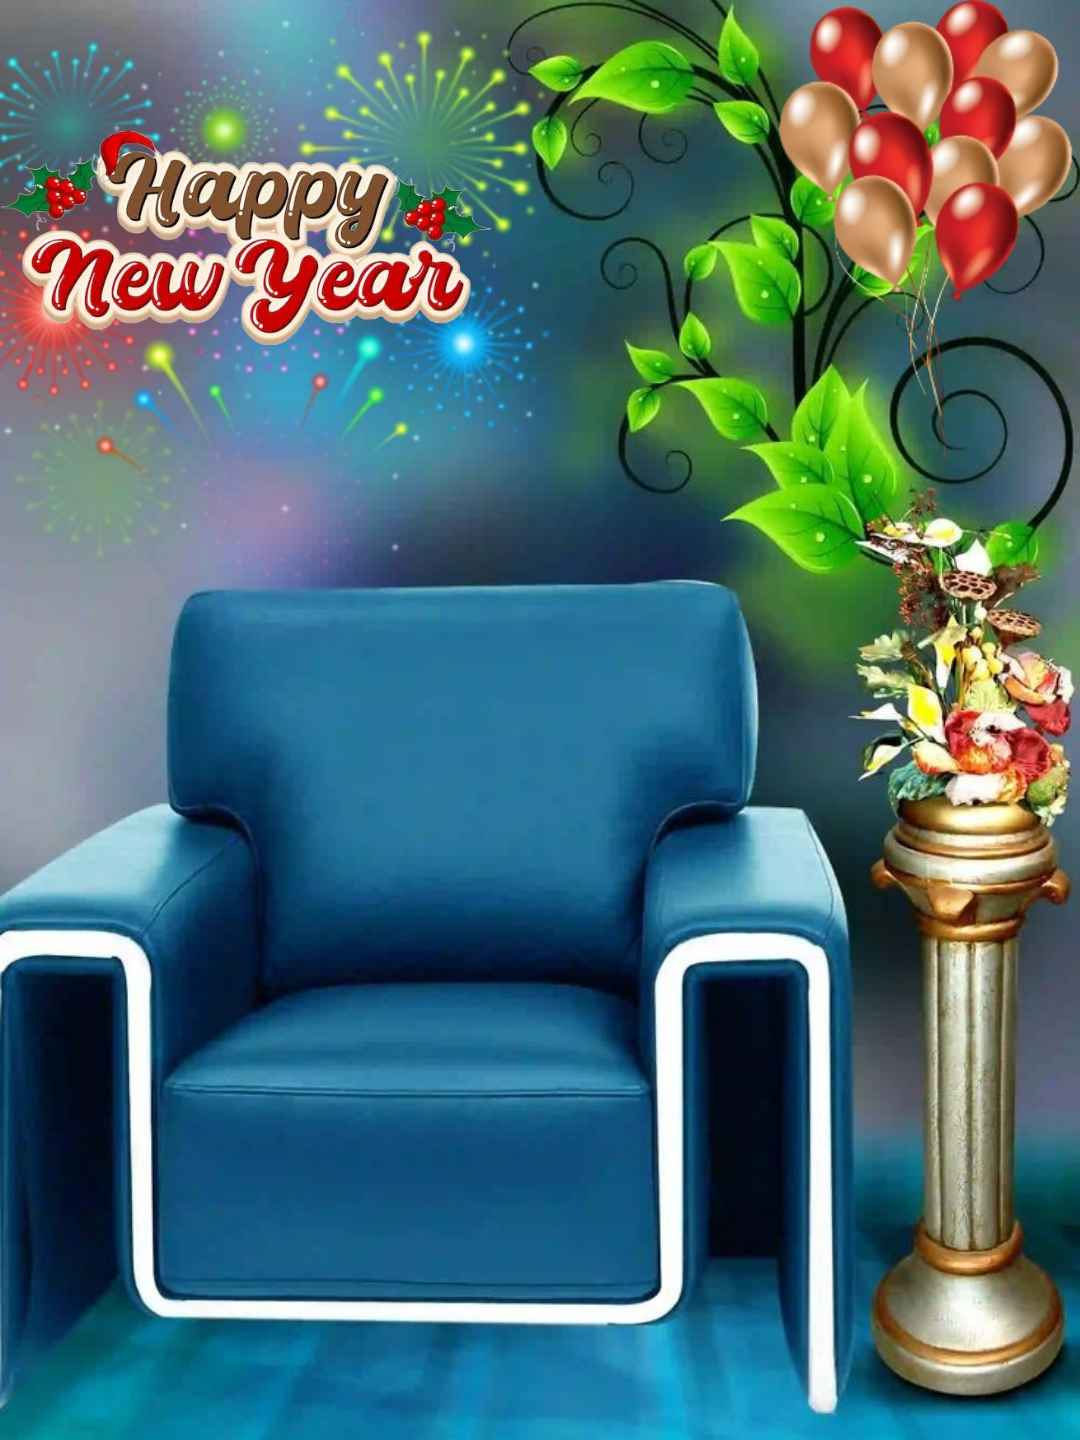 Chair Editing Background for happy new year